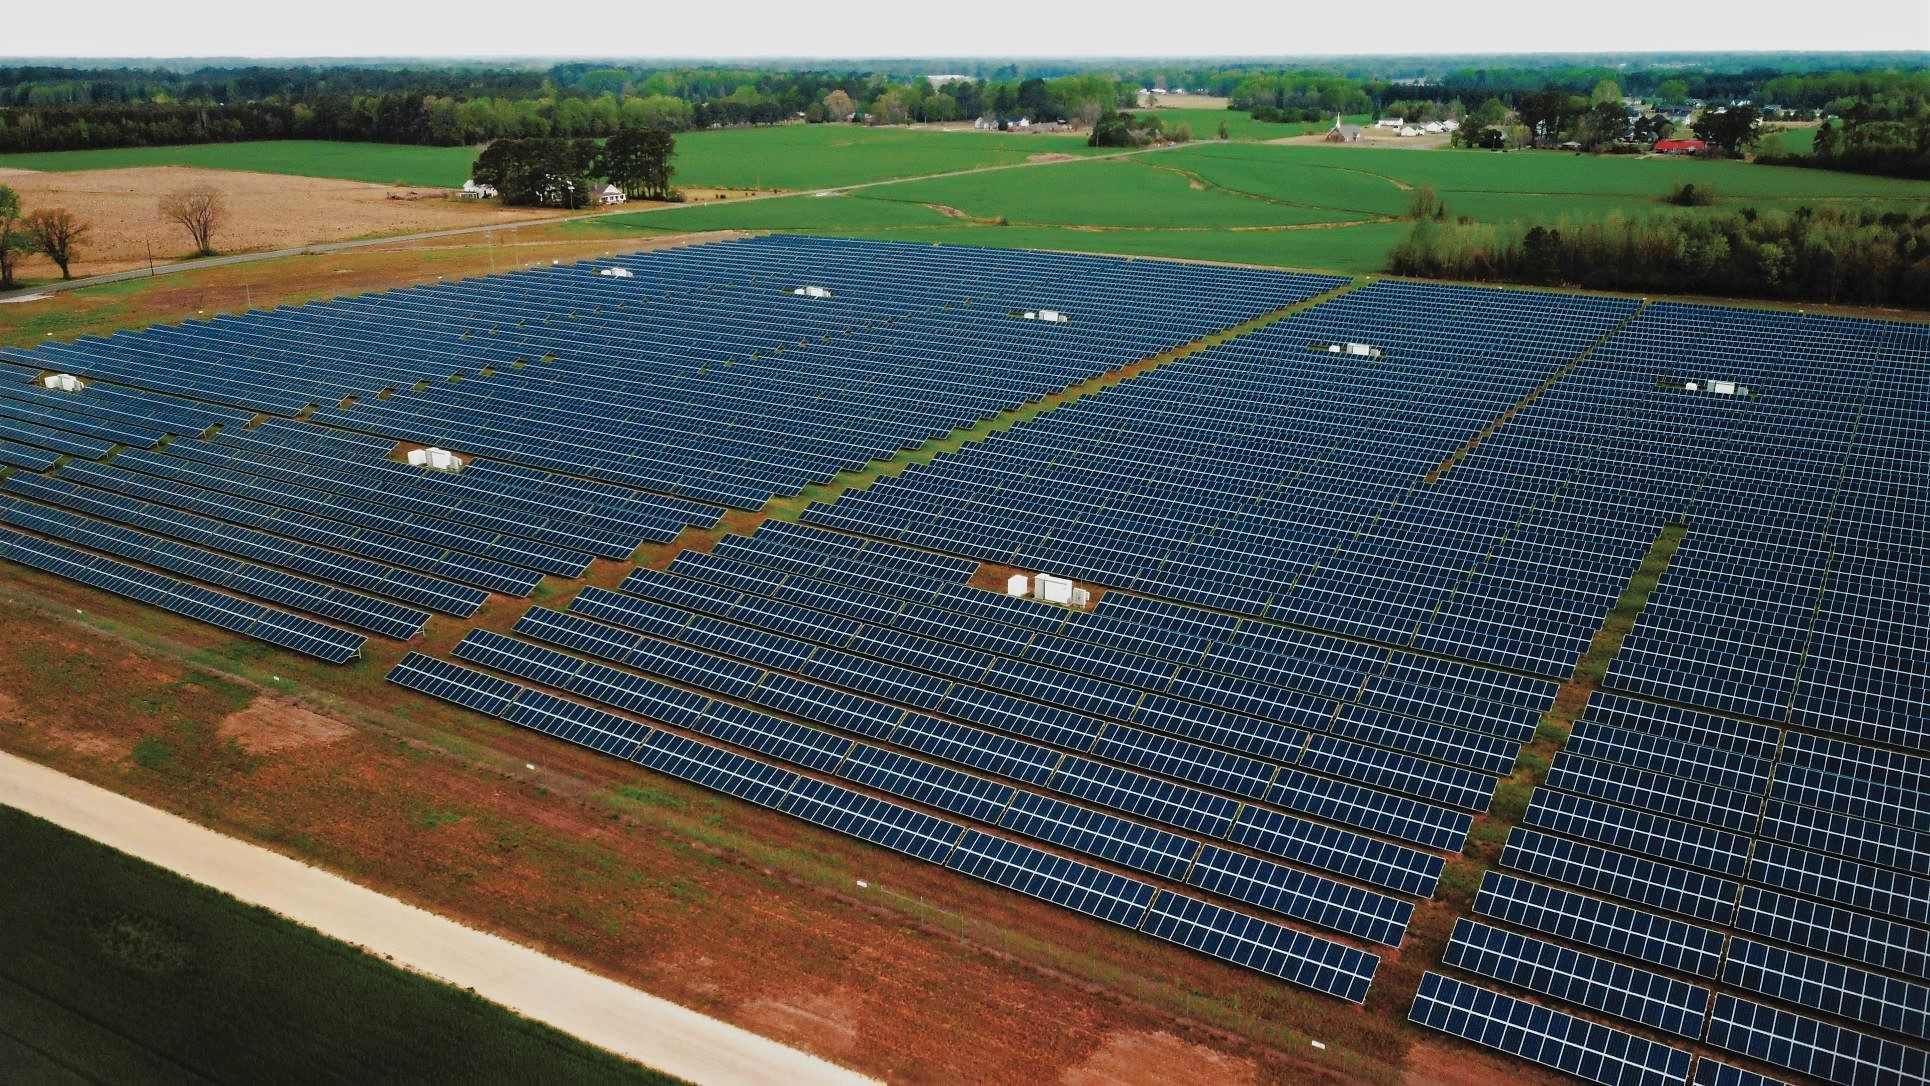 Photo of a field of solar panels.